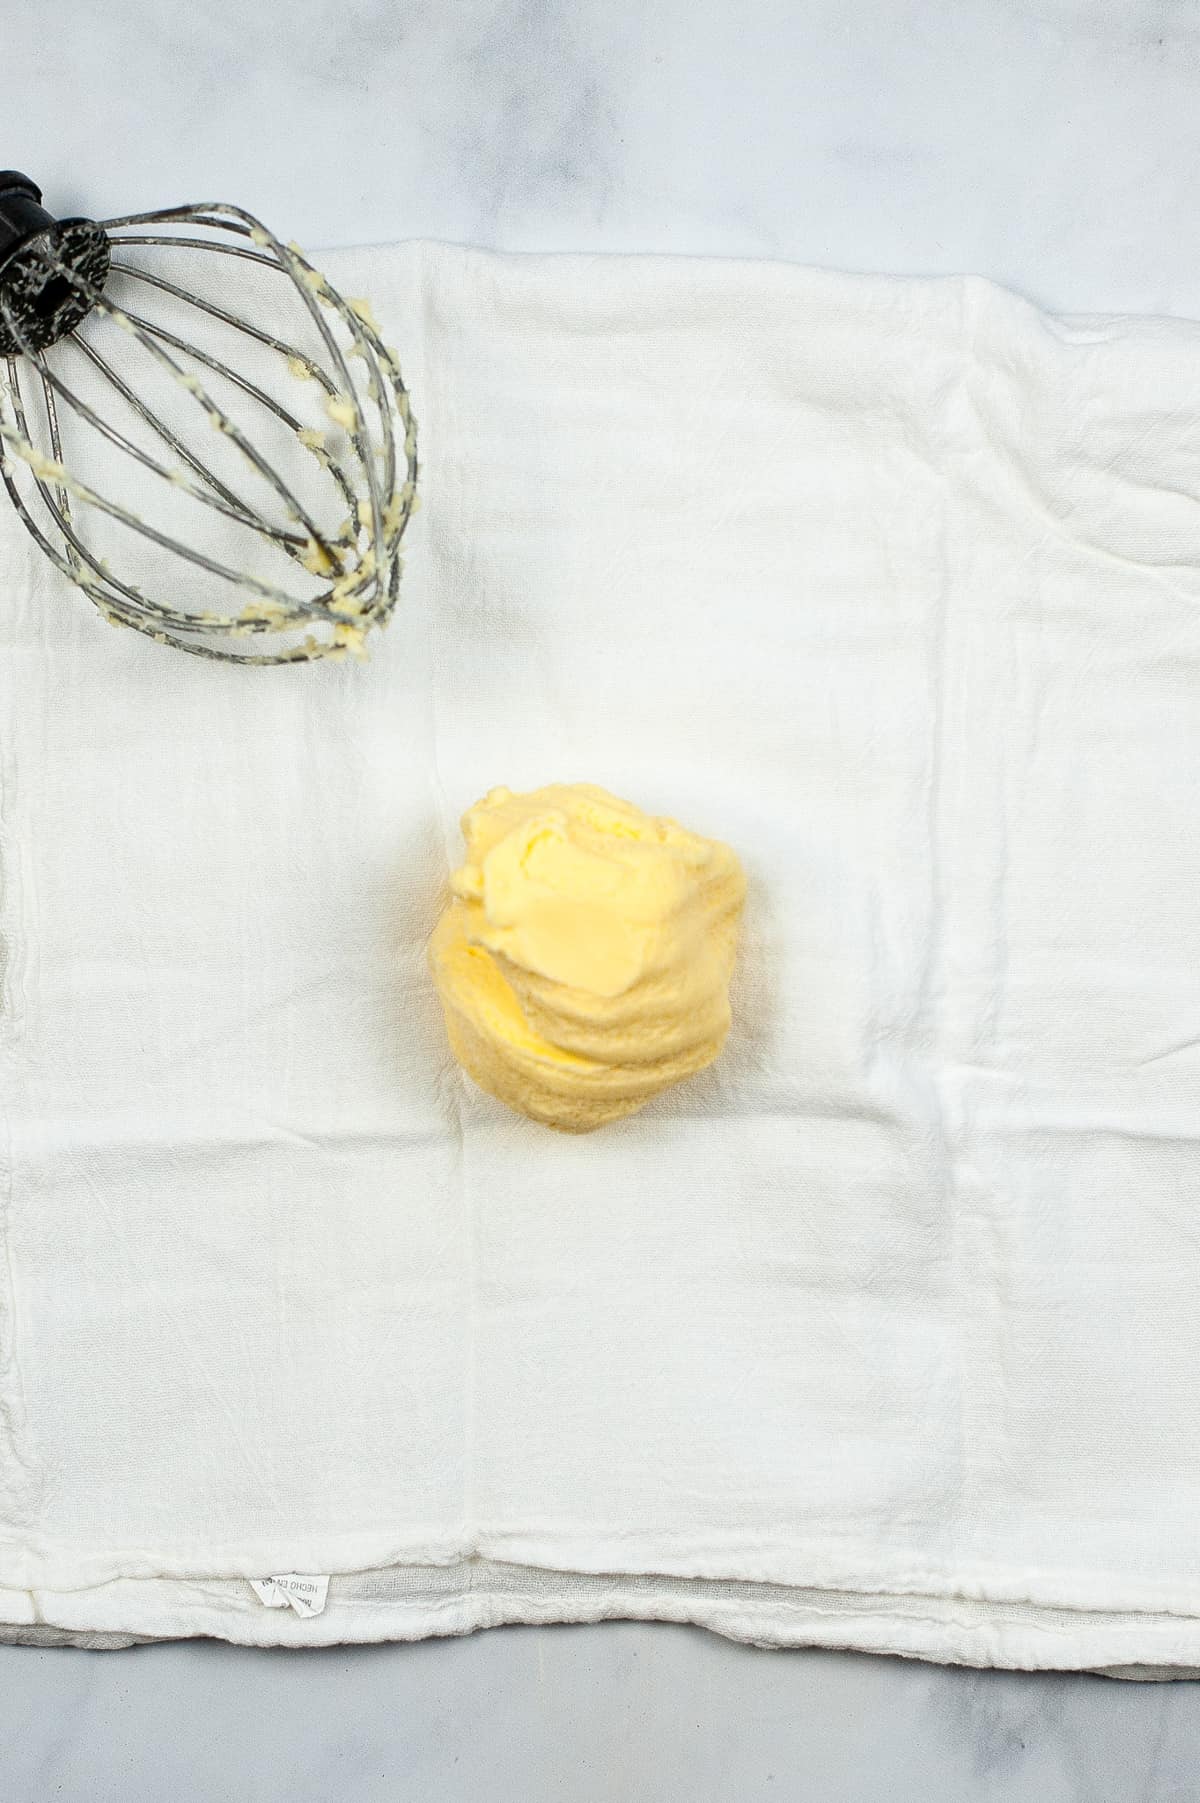 Ball of butter in center of cheesecloth